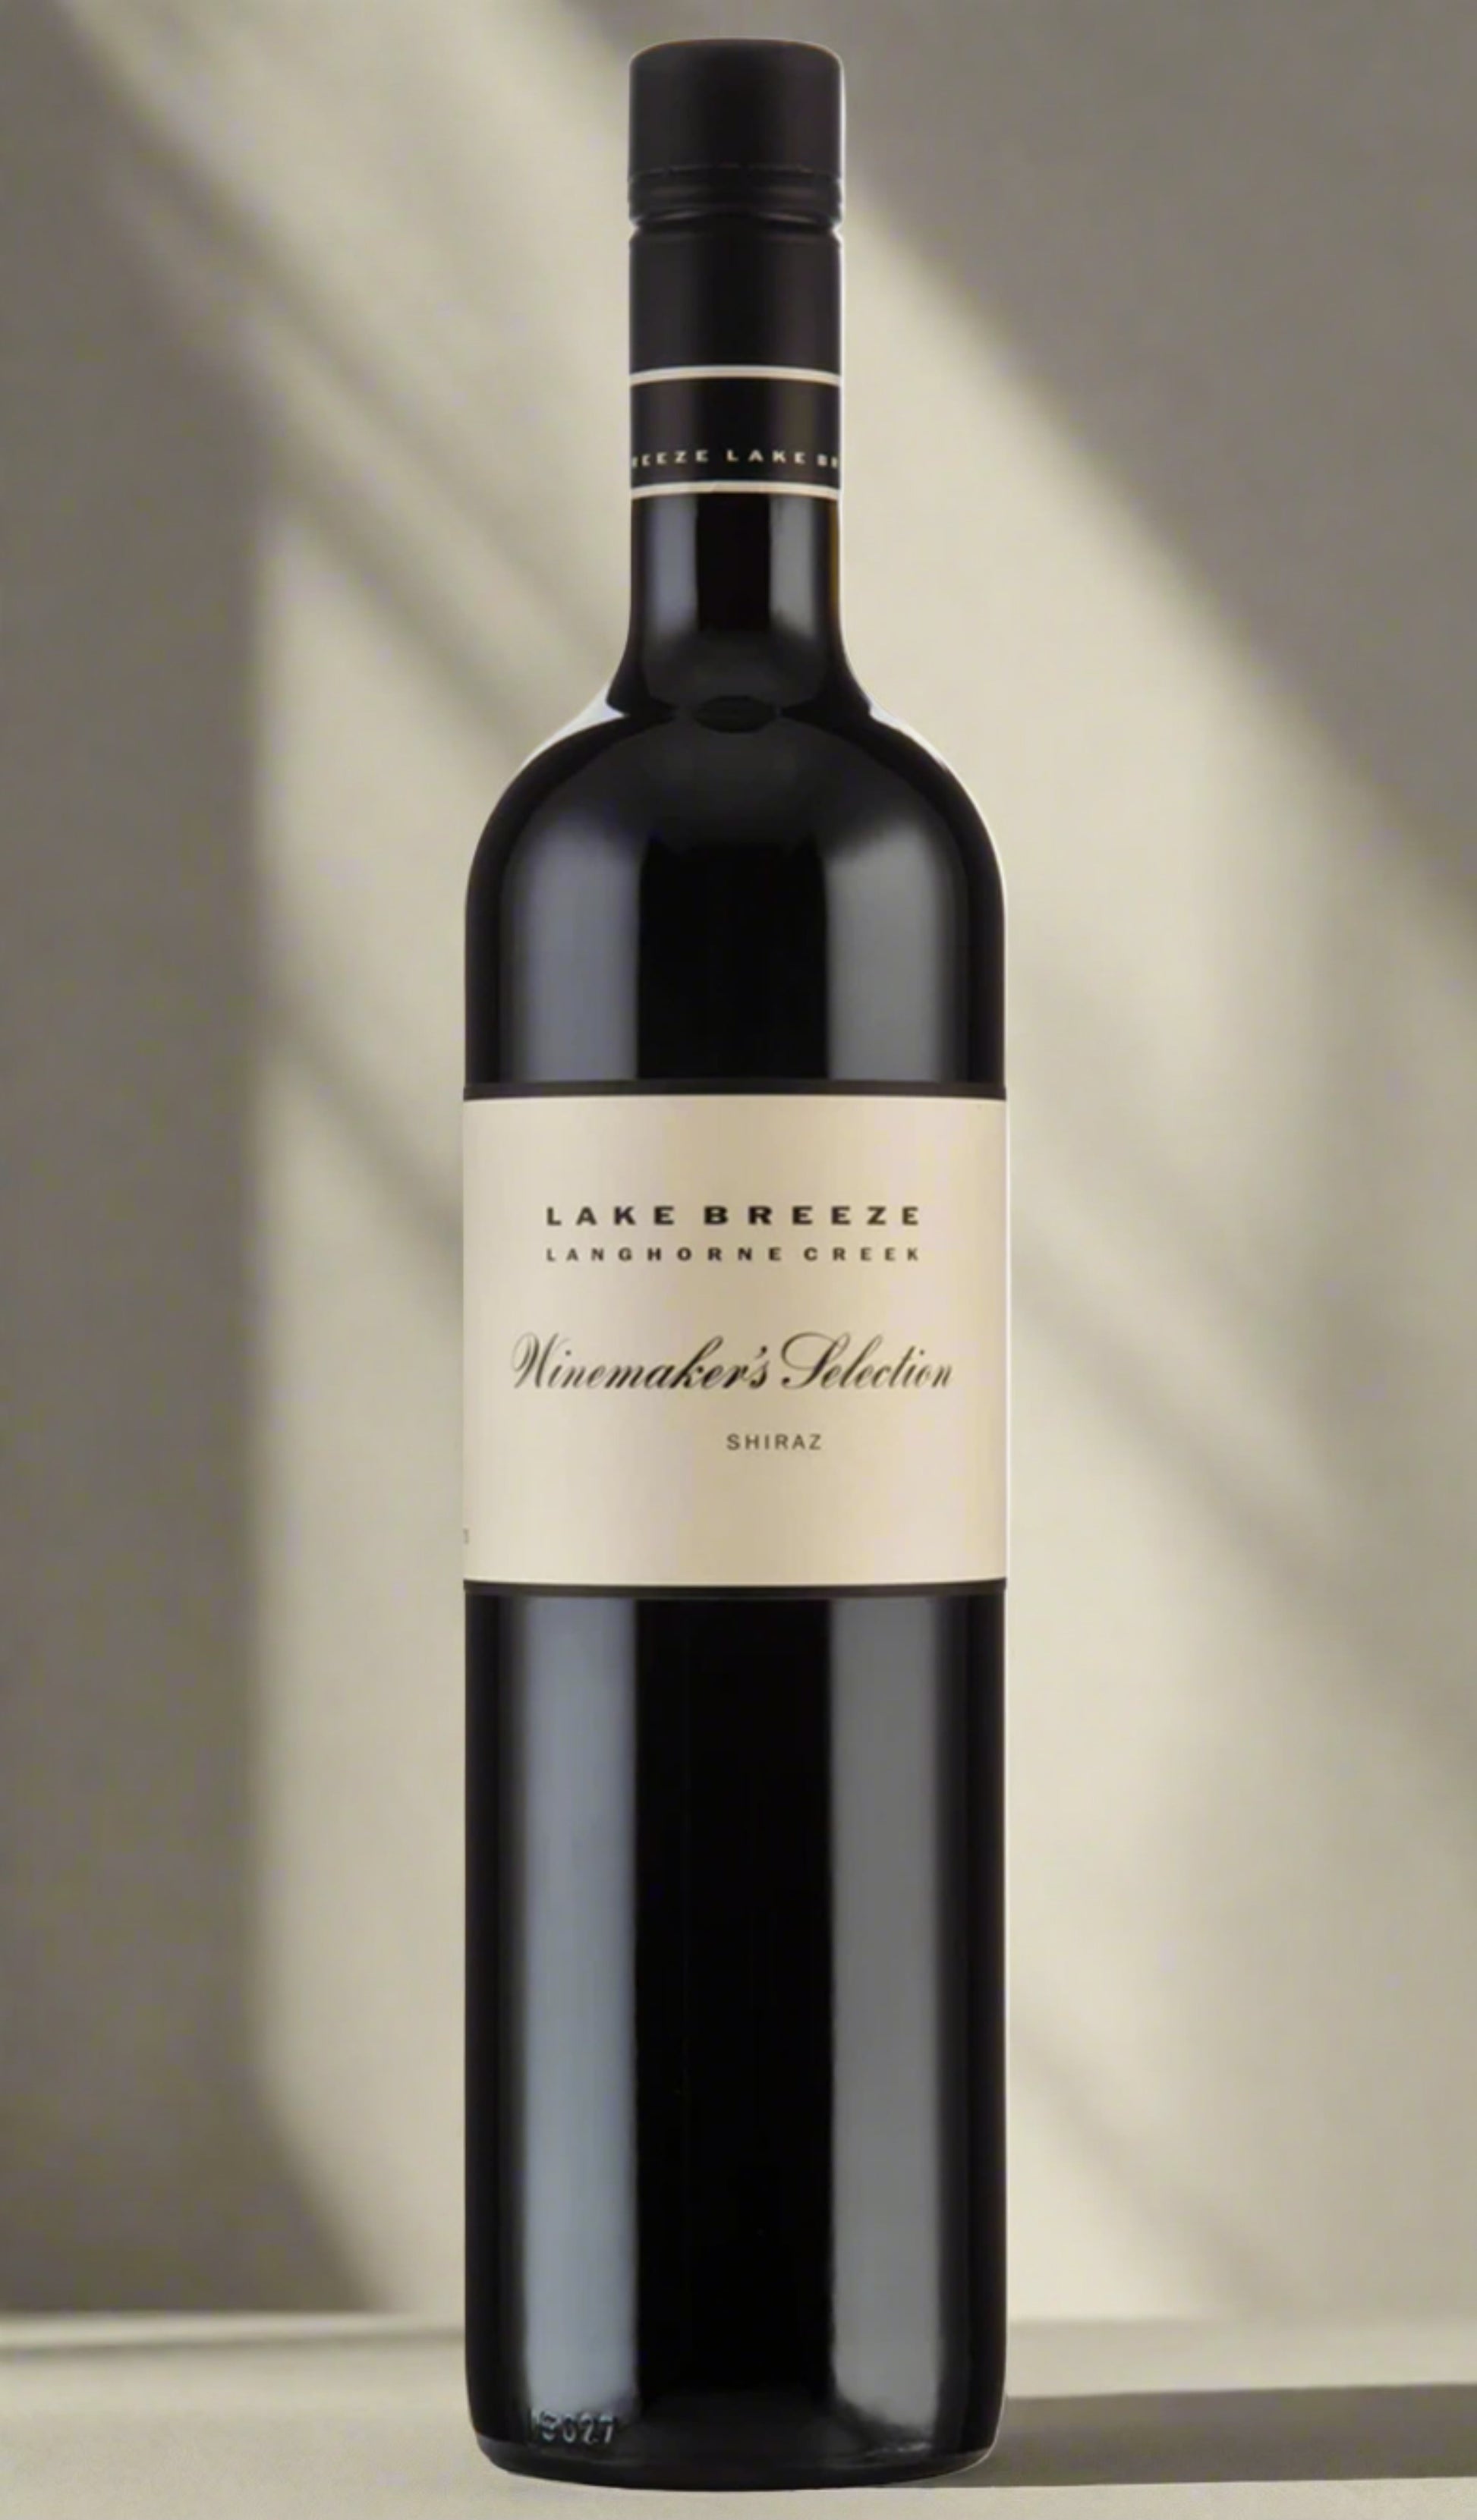 Find out more or buy Lake Breeze Winemaker’s Selection Shiraz 2019 online at Wine Sellers Direct - Australia’s independent liquor specialists.